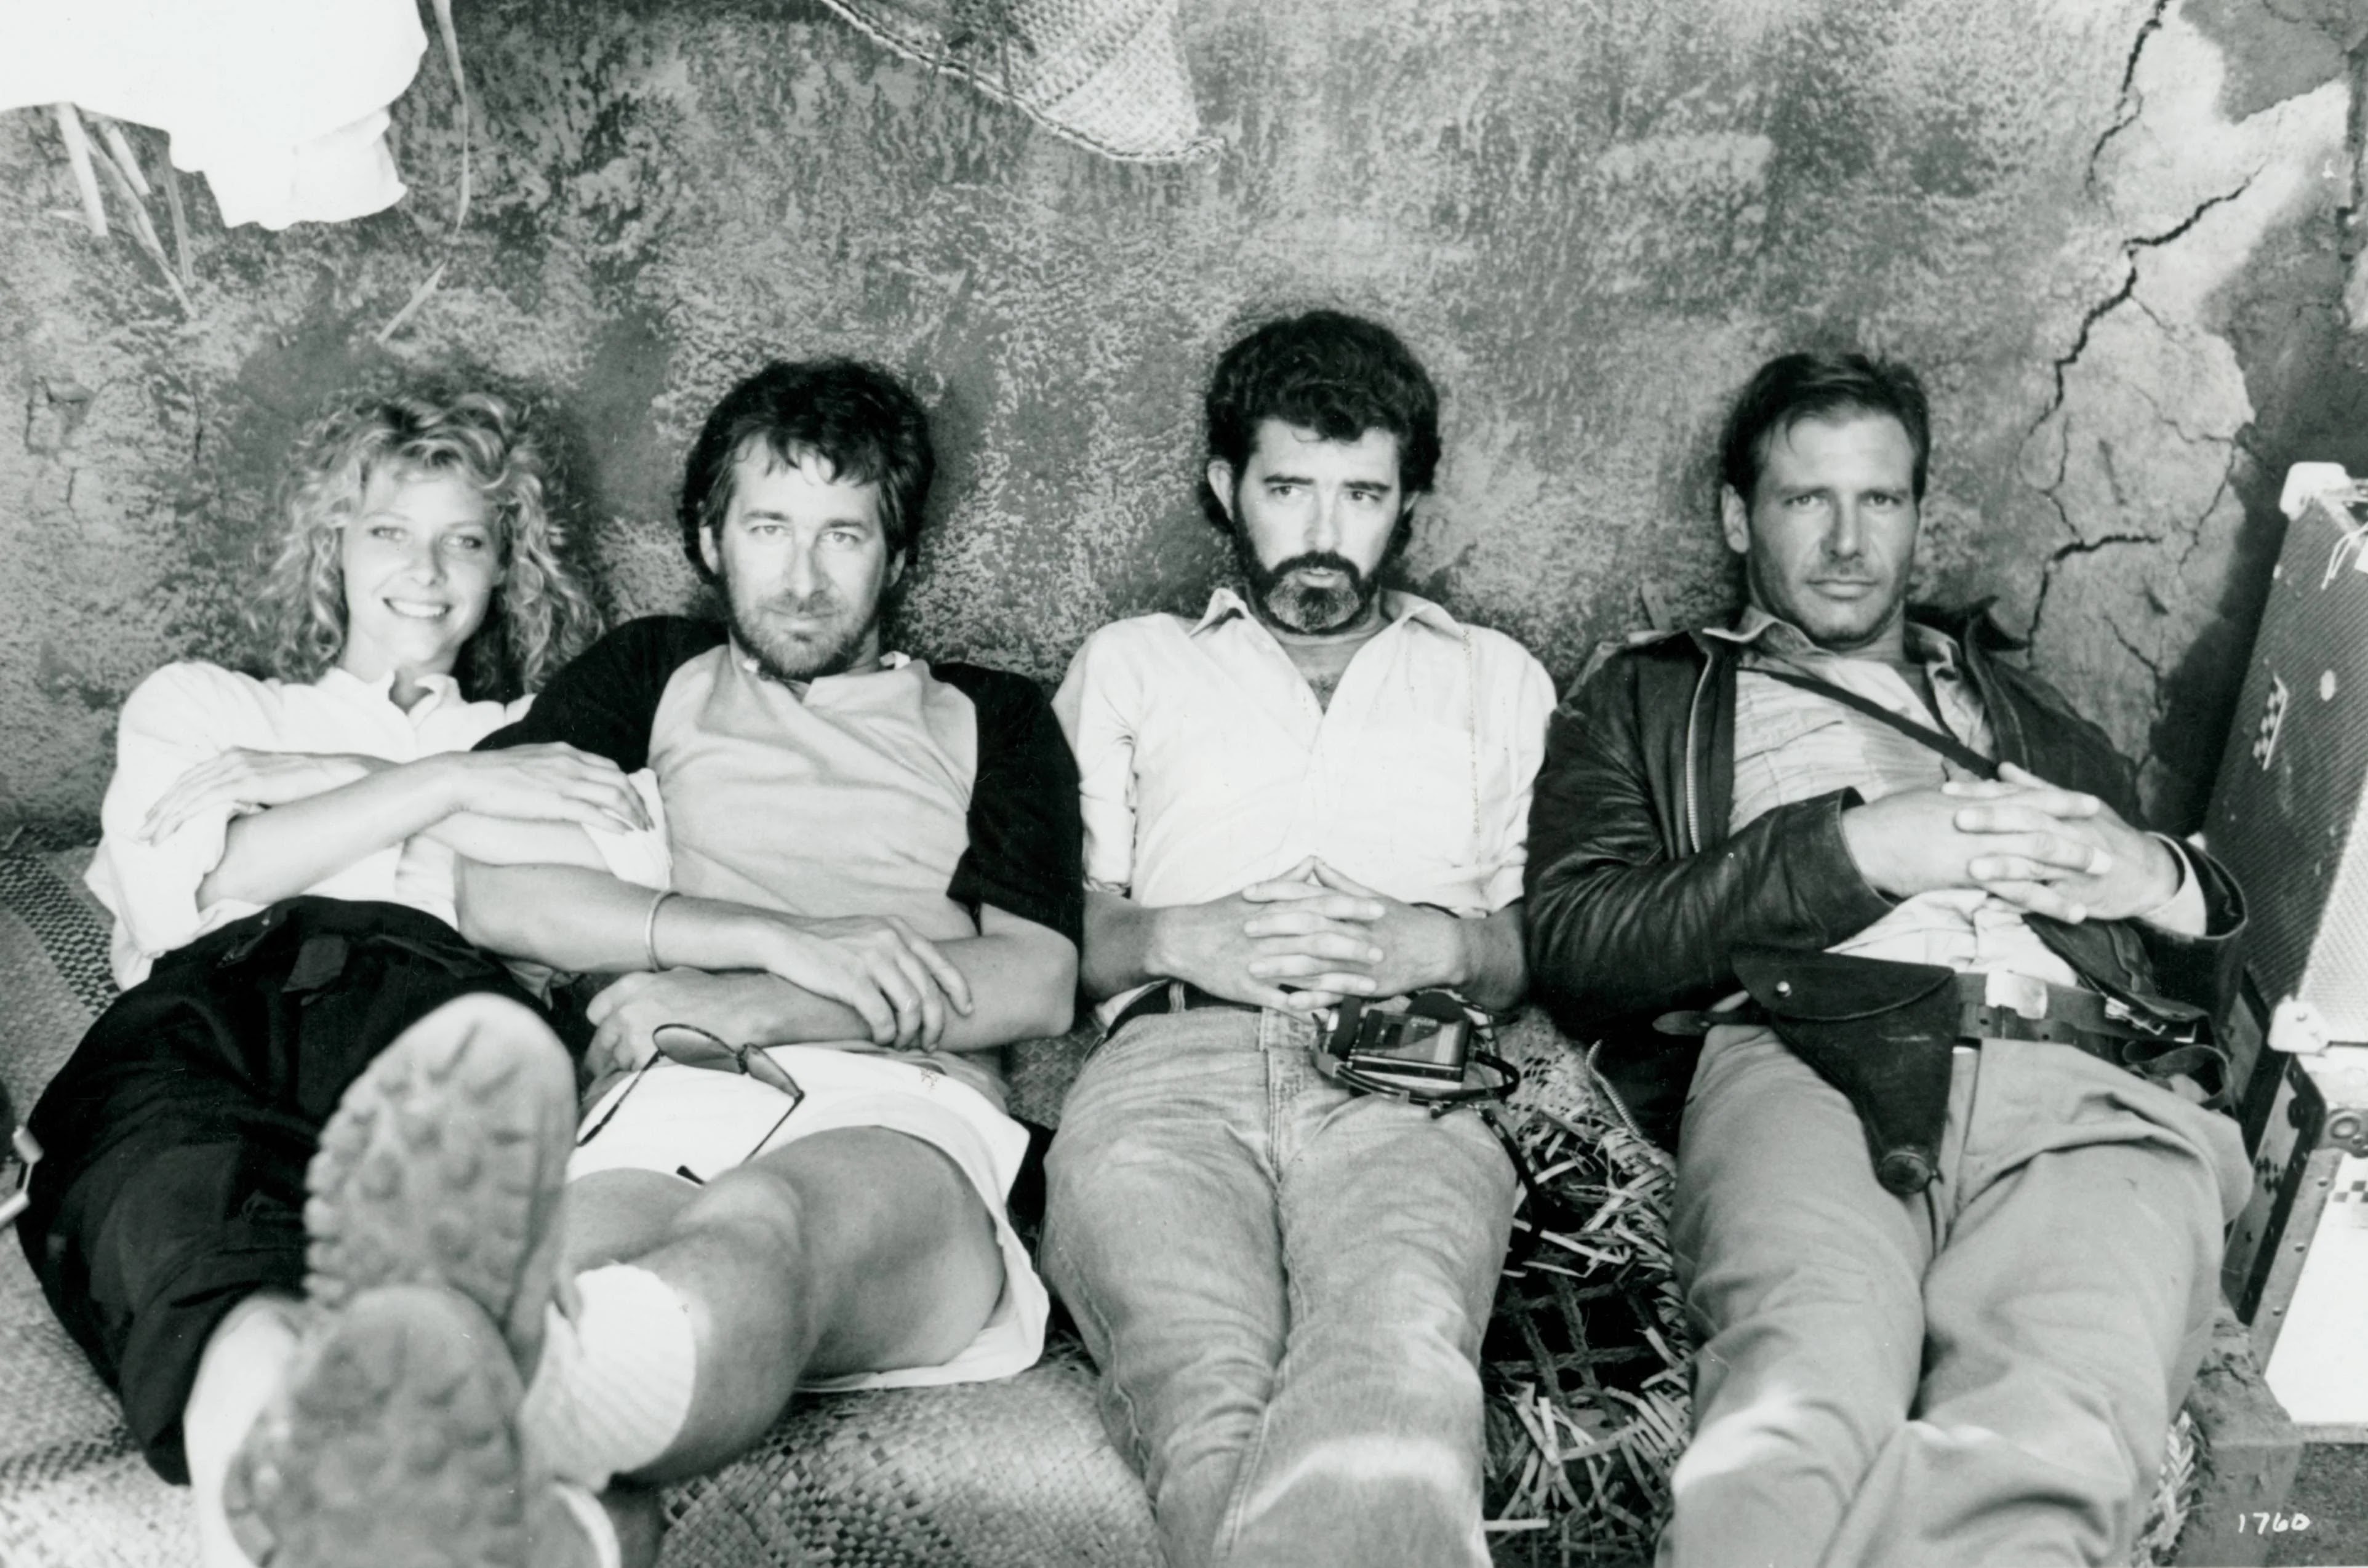 Kate Capshaw, Steven Spielberg, George Lucas, and Harrison Ford relaxing